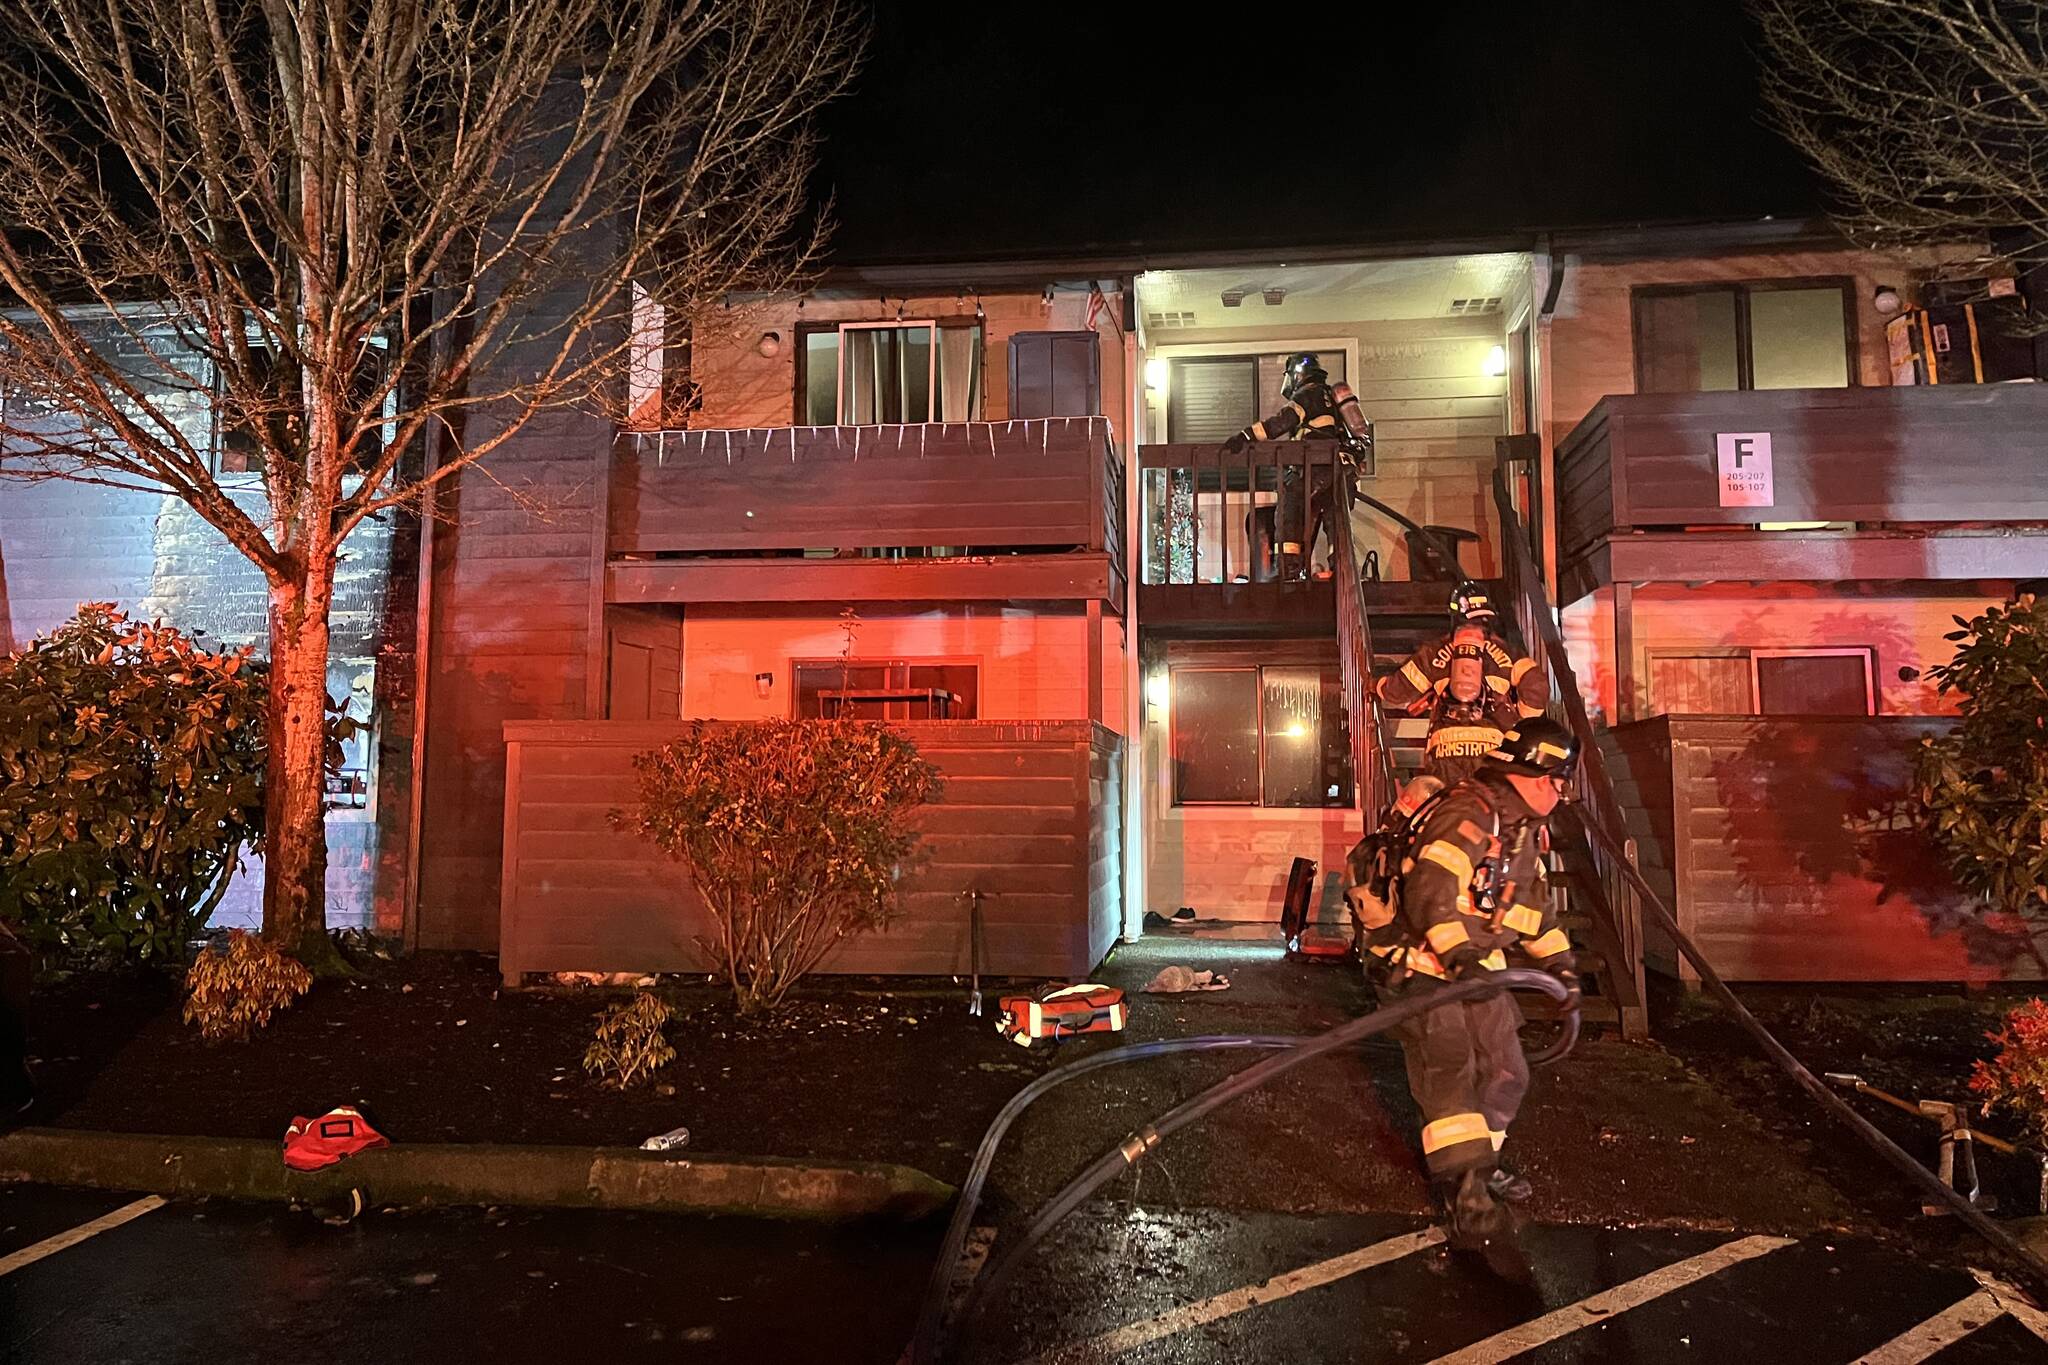 Firefighters respond to an early morning fire Saturday at The Ardent apartments in Mill Creek, Washington. (South County Fire)